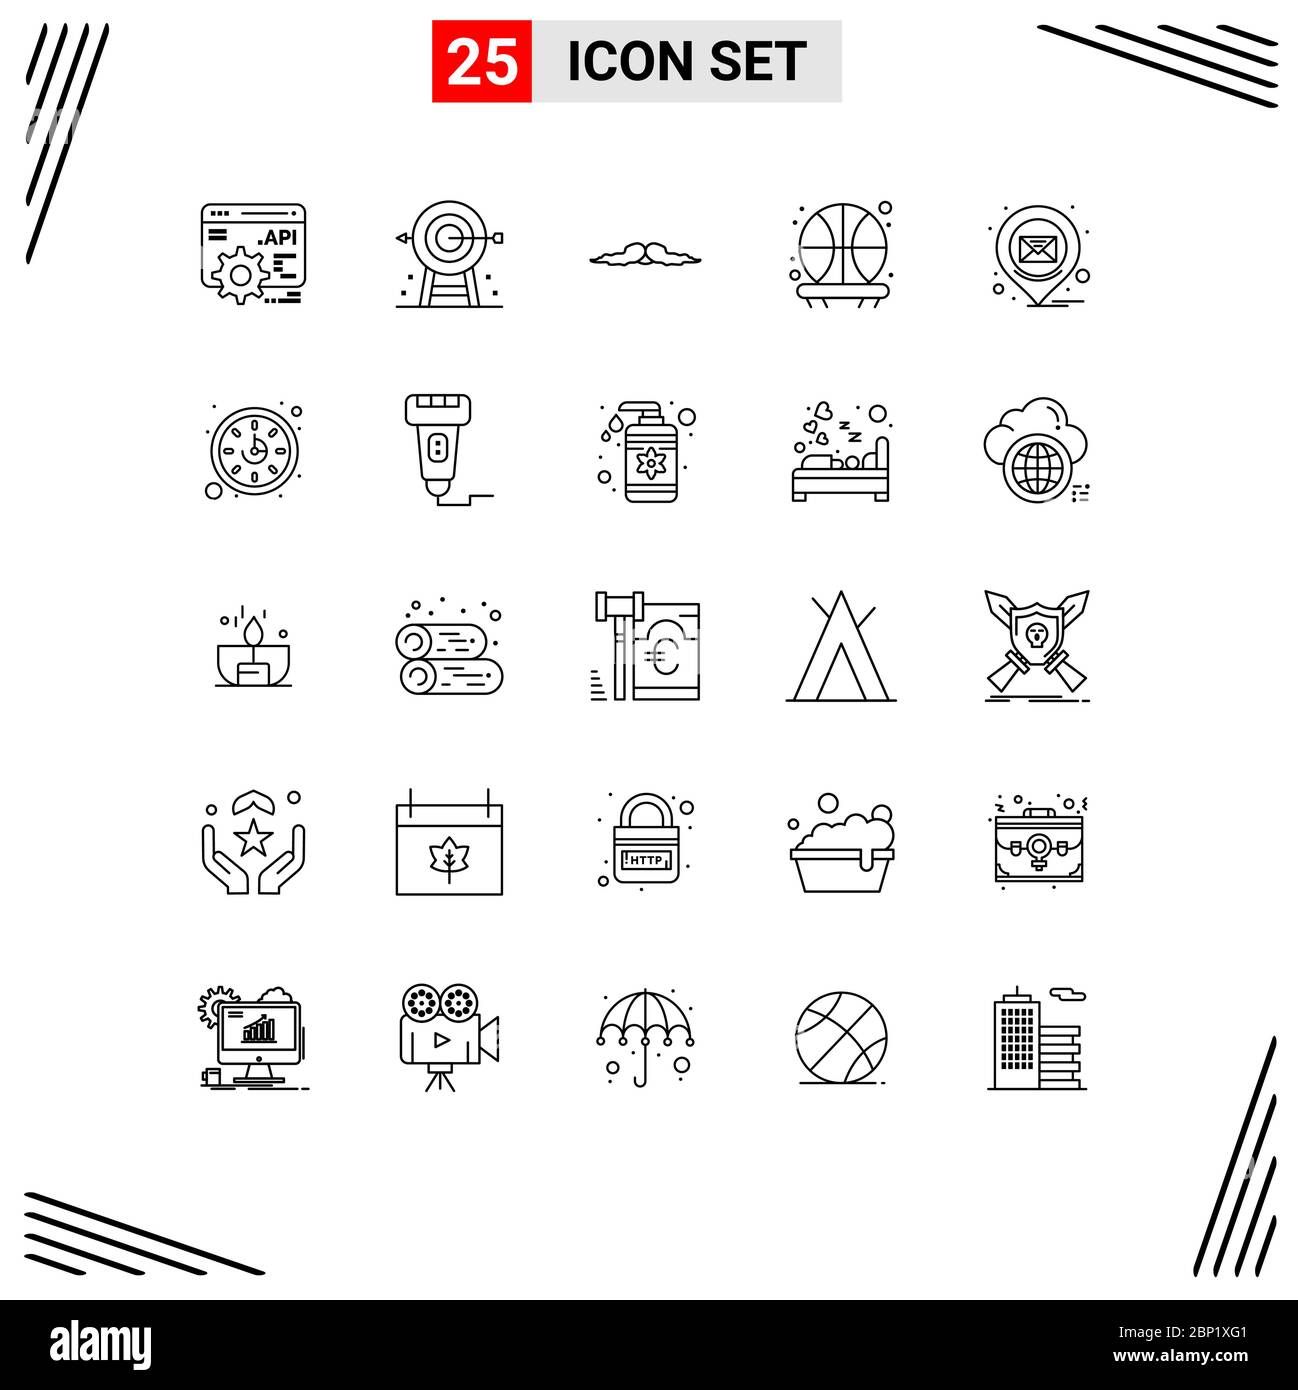 Modern Set of 25 Lines and symbols such as location, shot, moustache, basketball, men Editable Vector Design Elements Stock Vector